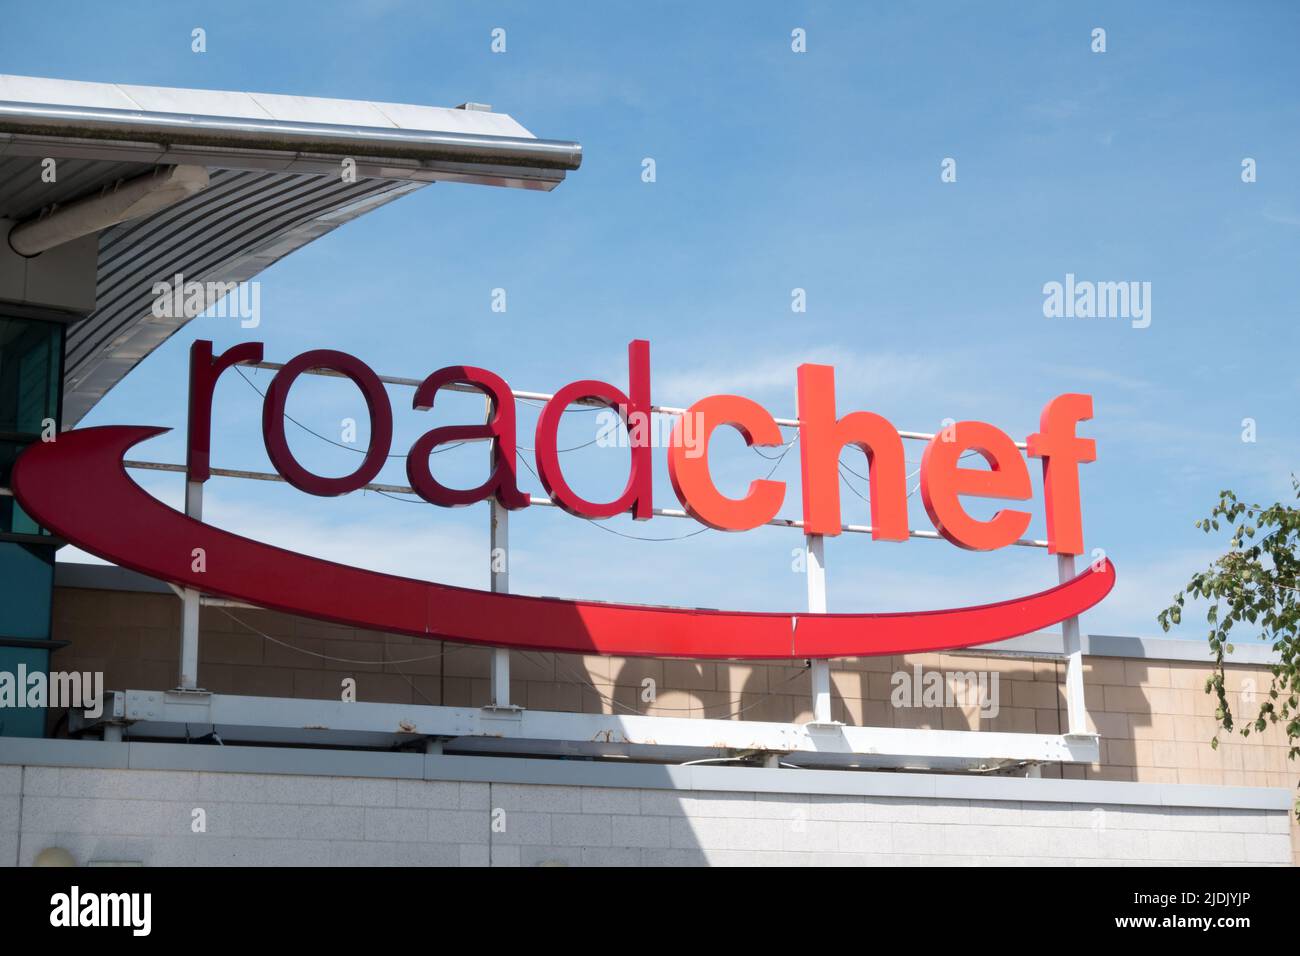 Roadchef third largest Motorway services provider in England Stock Photo